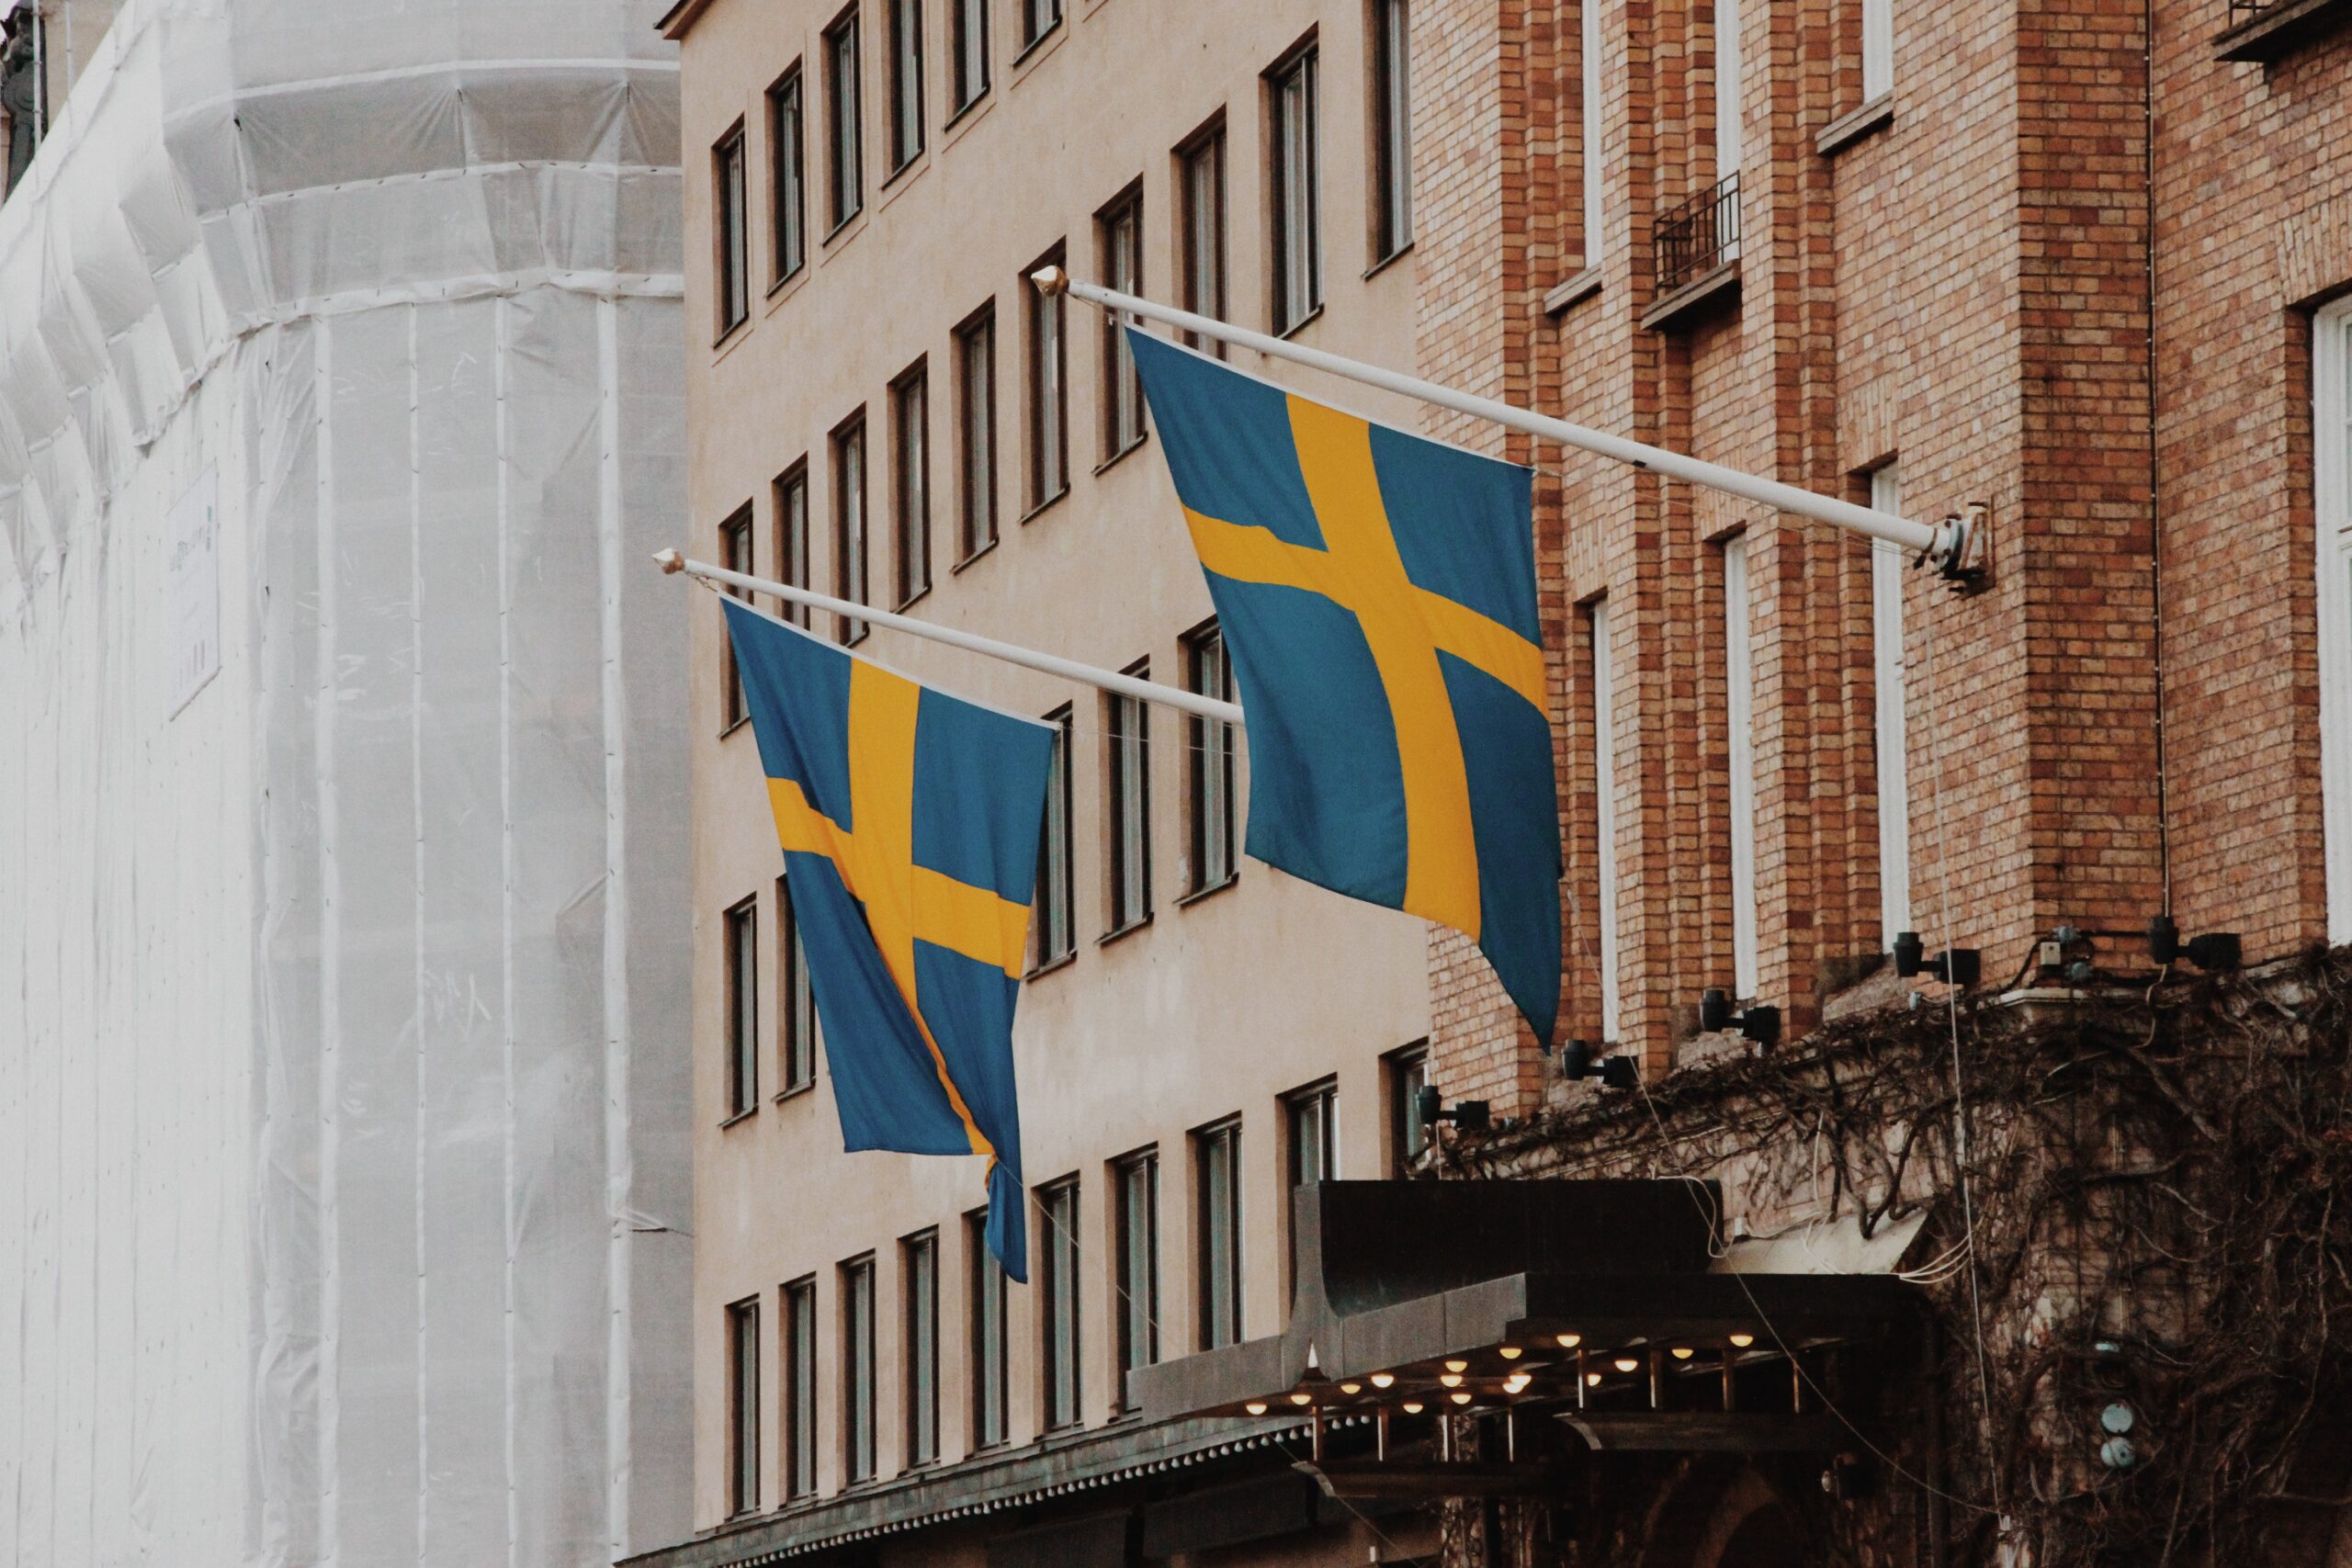 4 things you need to take care of when arriving in Sweden 